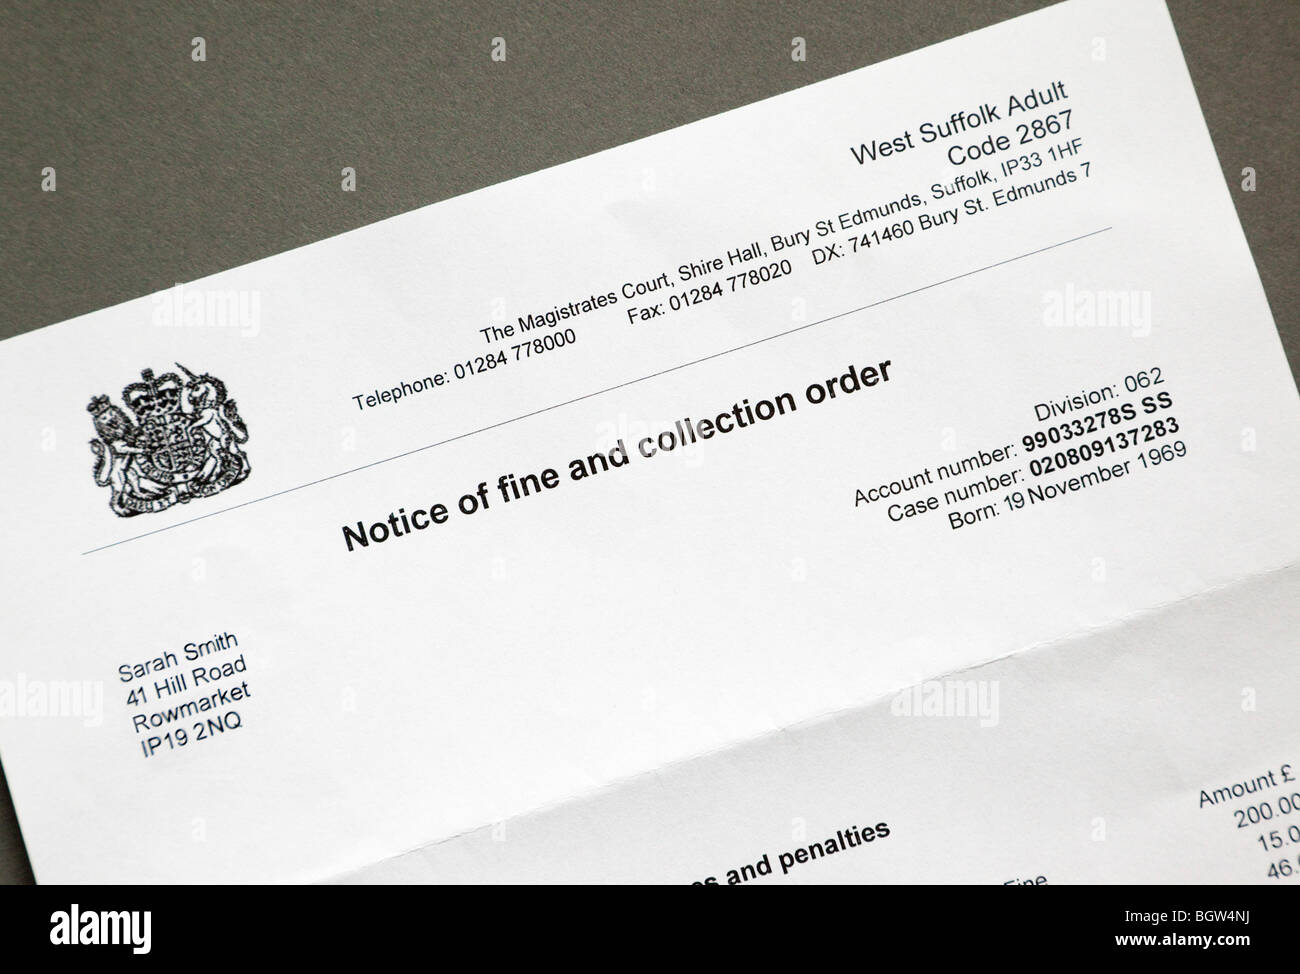 Notice of fine and collection order issued by a magistrates court Stock Photo